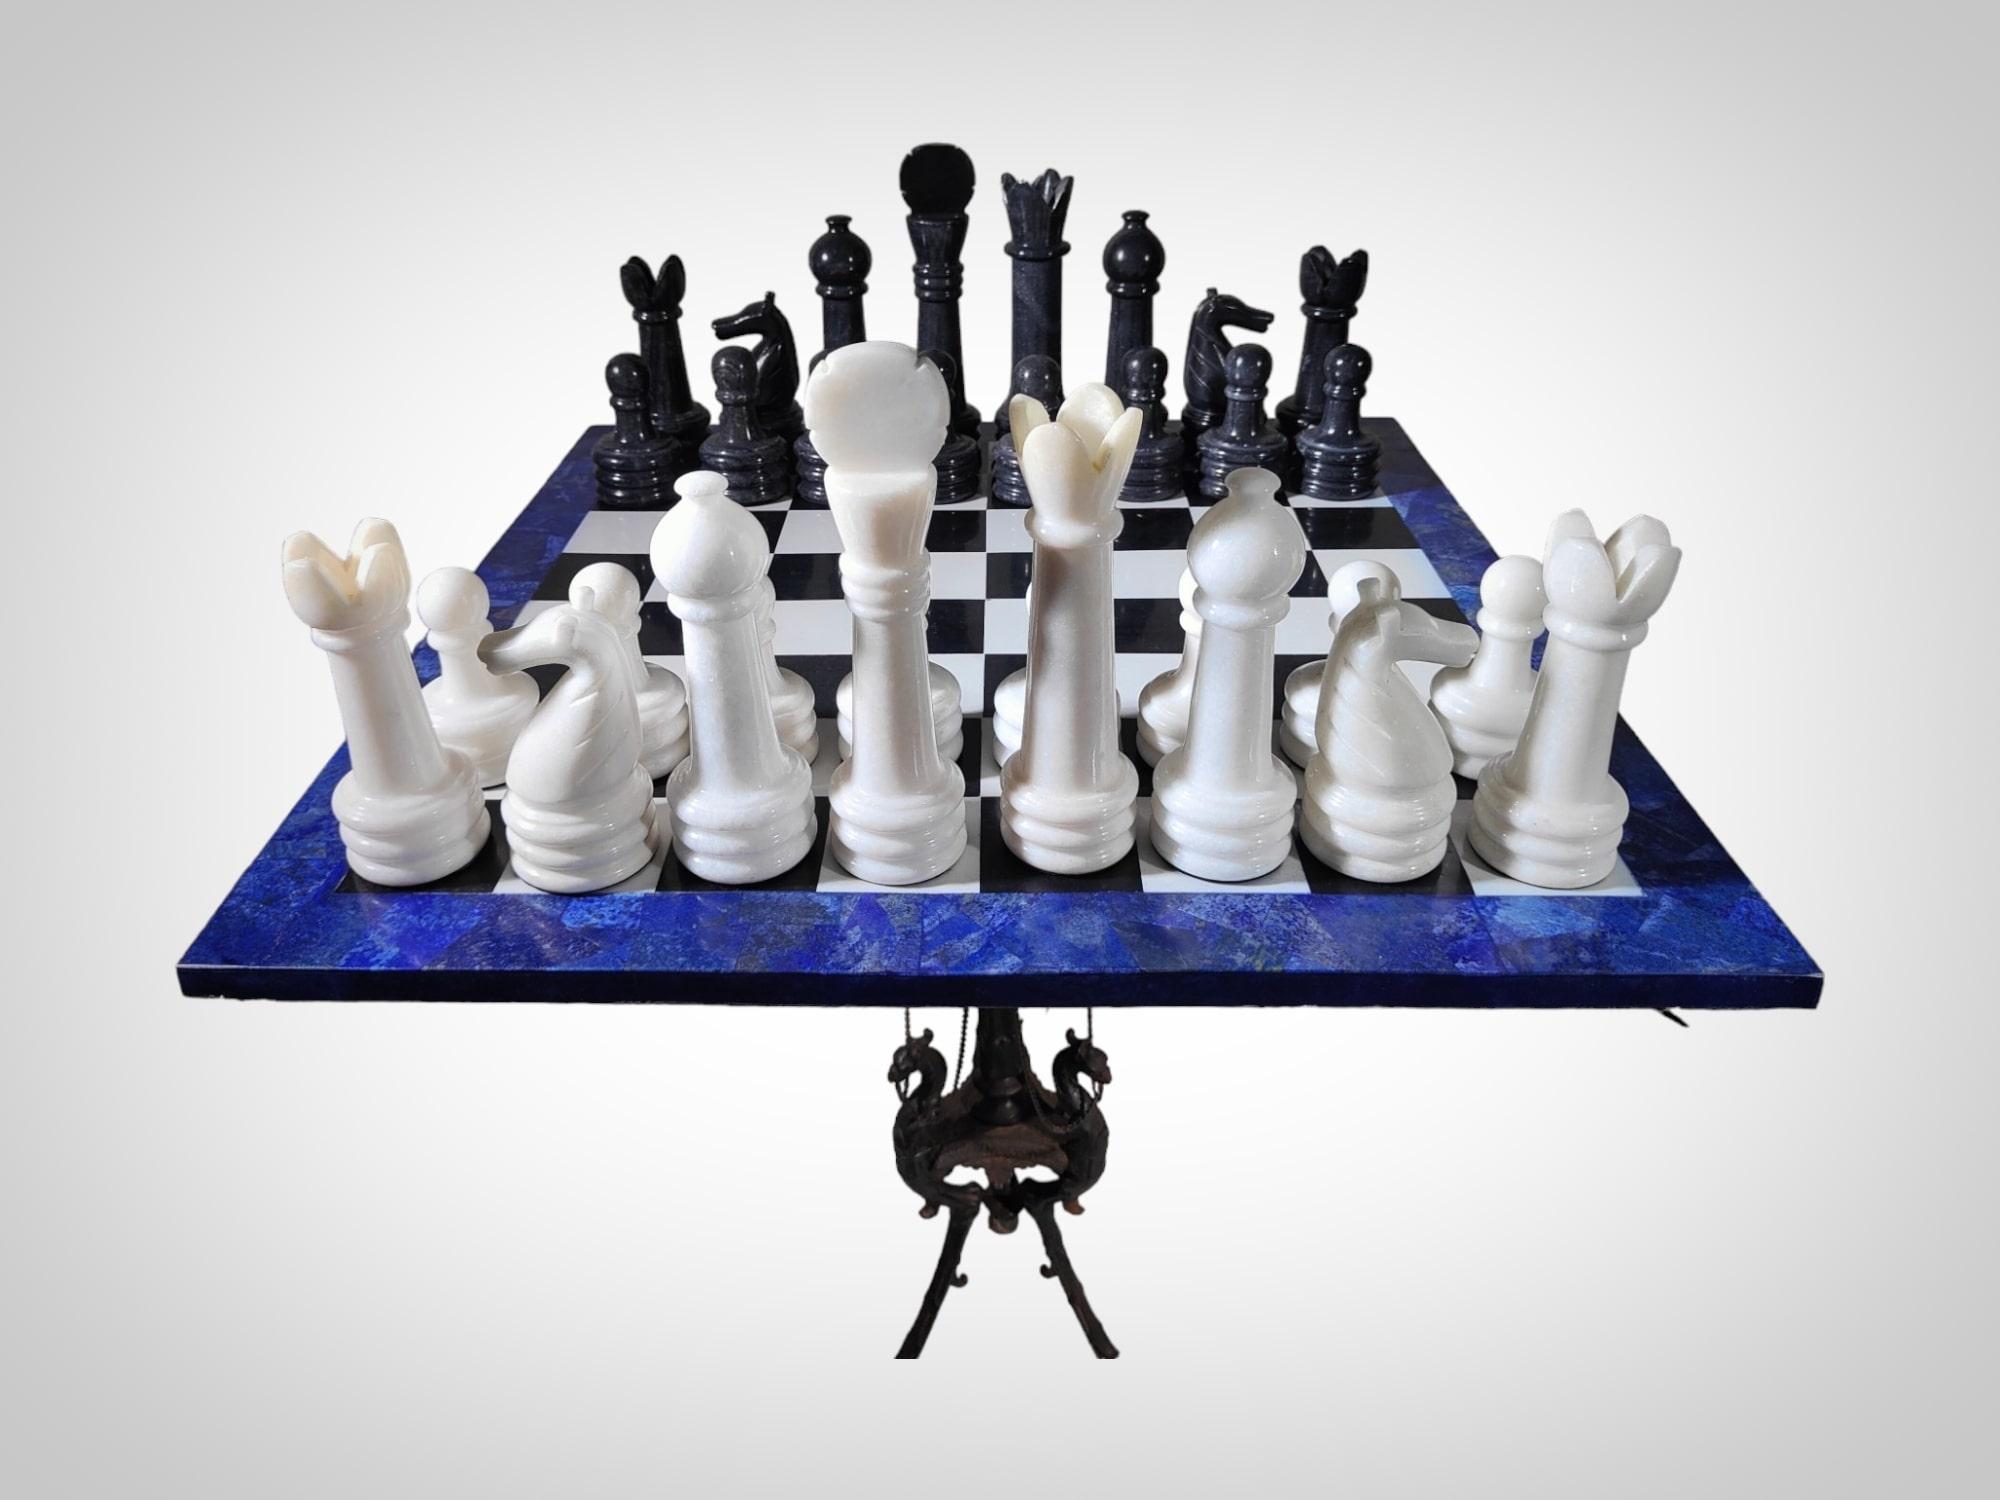 Italian Chess Table from the 1950s - Lapis Lazuli, Marble, and Dragon-Shaped  For Sale 2